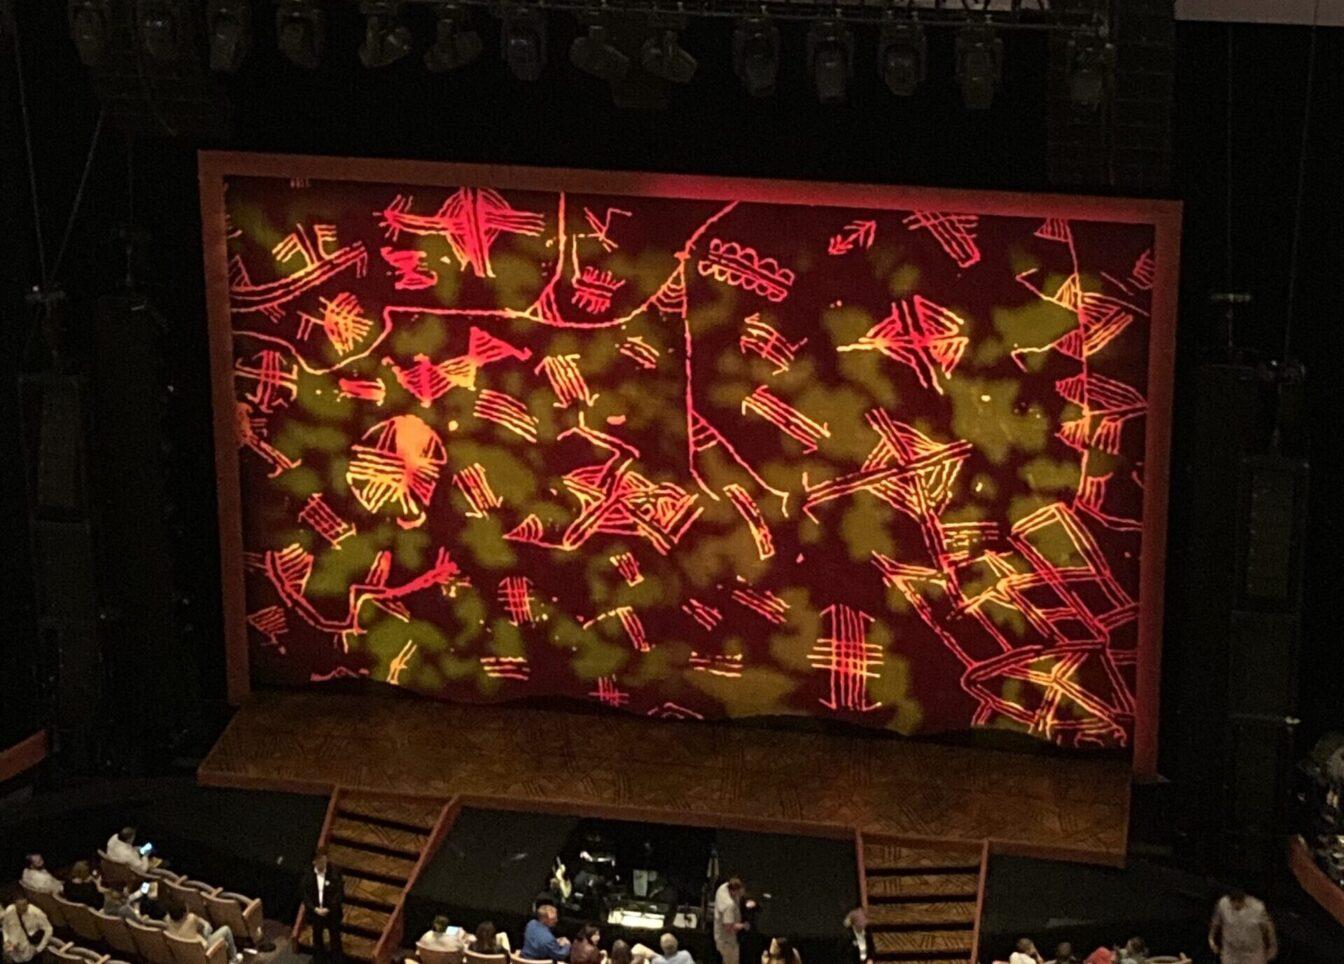 Overture Center hosts The Lion King musical